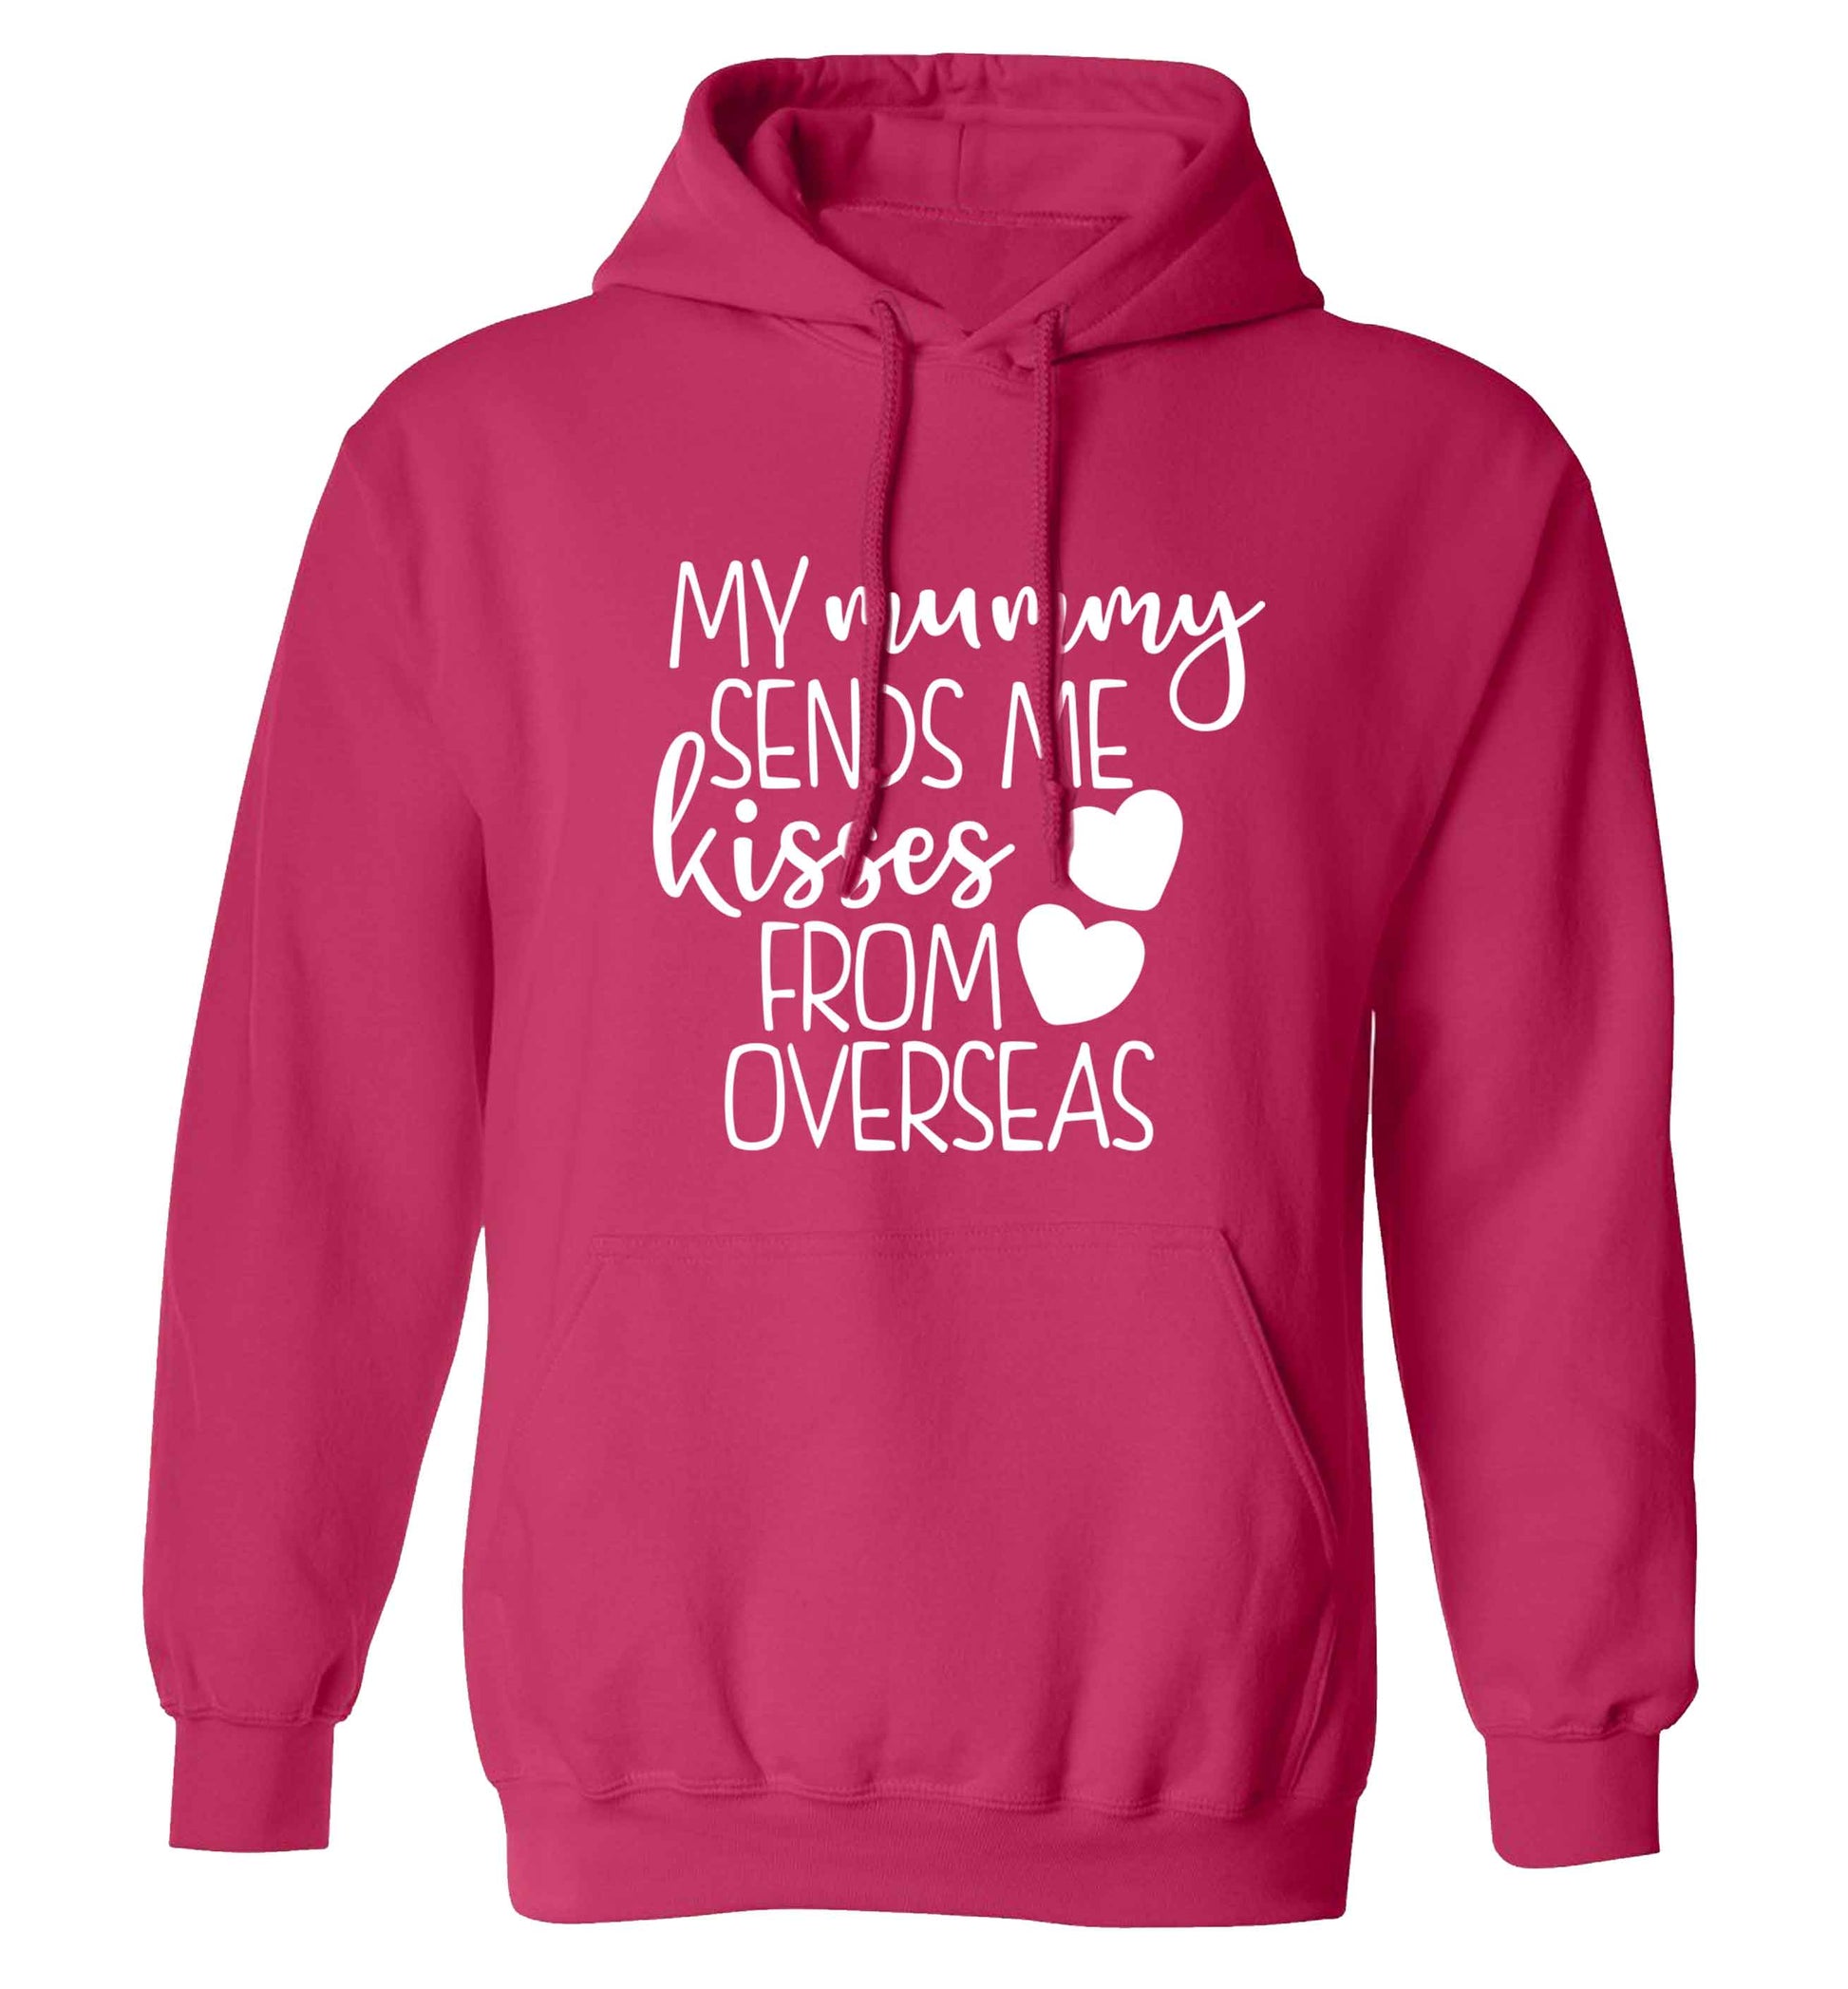 My mummy sends me kisses from overseas adults unisex pink hoodie 2XL